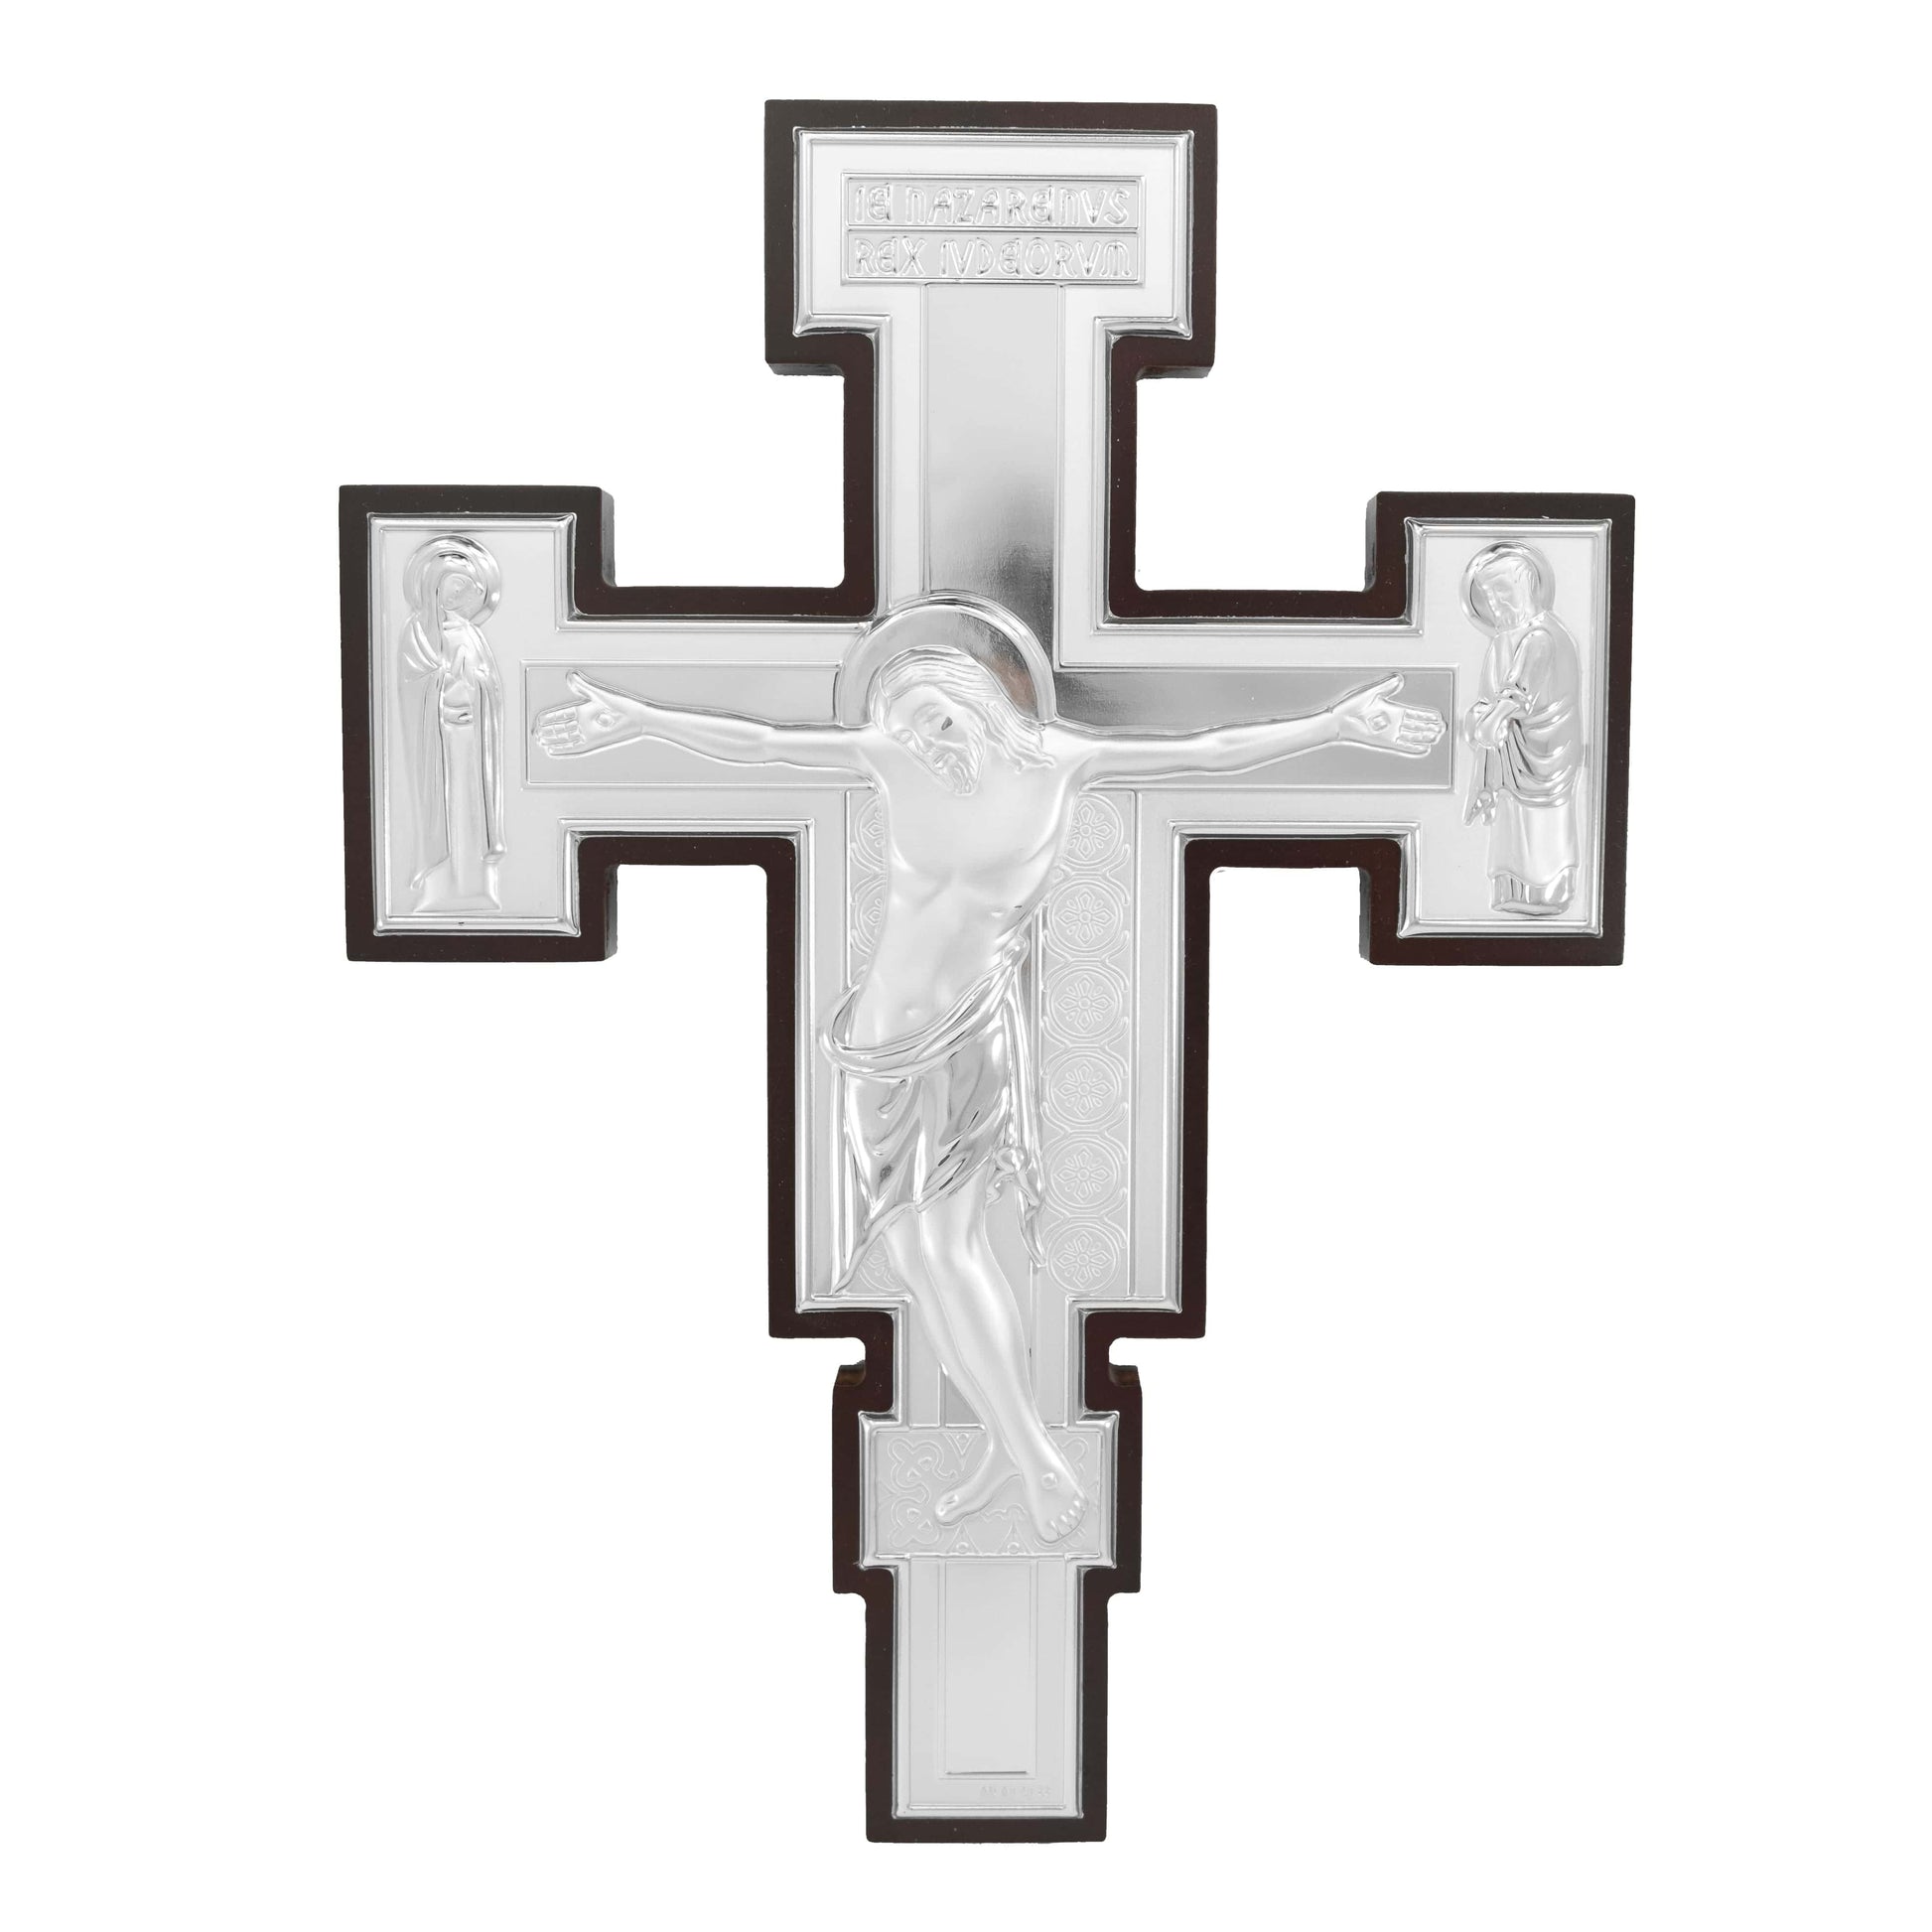 MONDO CATTOLICO 26 cm (10.24 in) Wooden Crucifix by Cimabue at Santa Croce With Silver Plaque